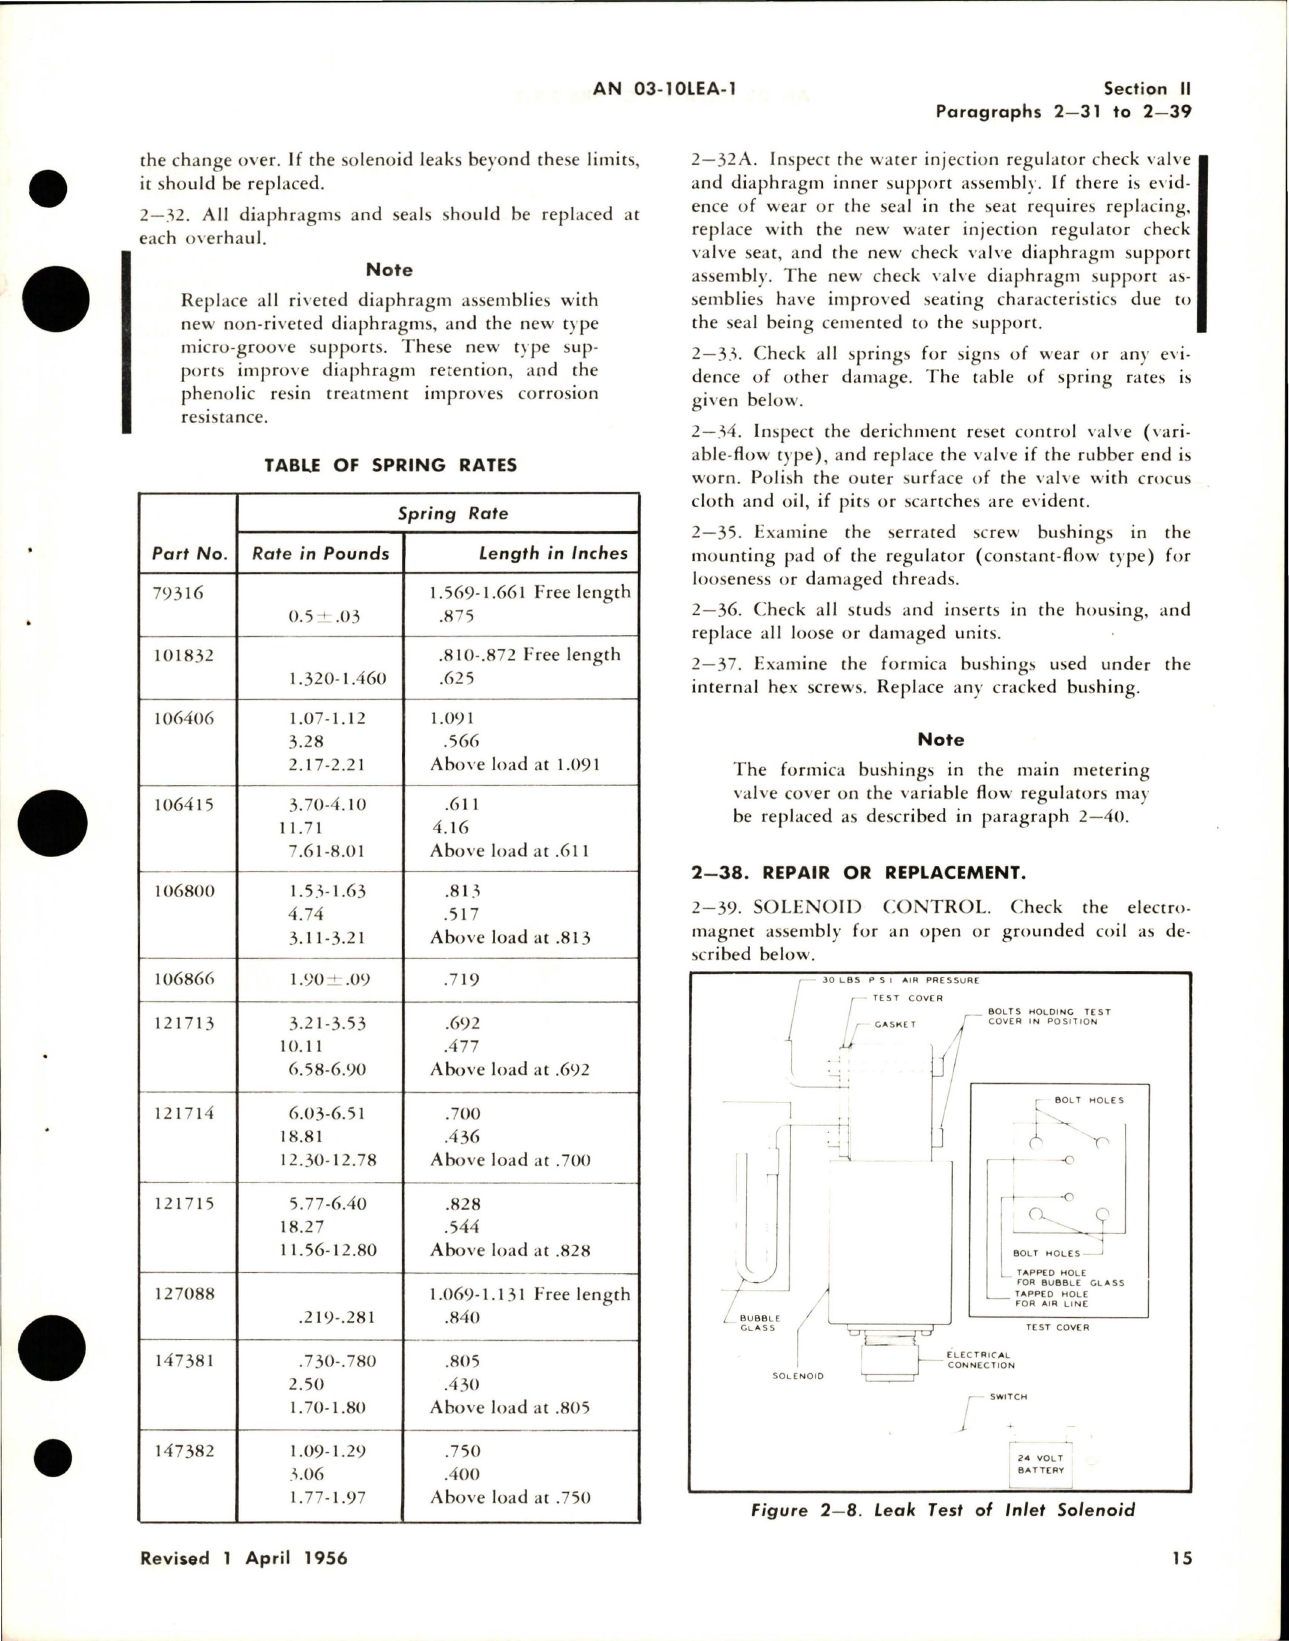 Sample page 5 from AirCorps Library document: Overhaul Instructions for Water Regulators 